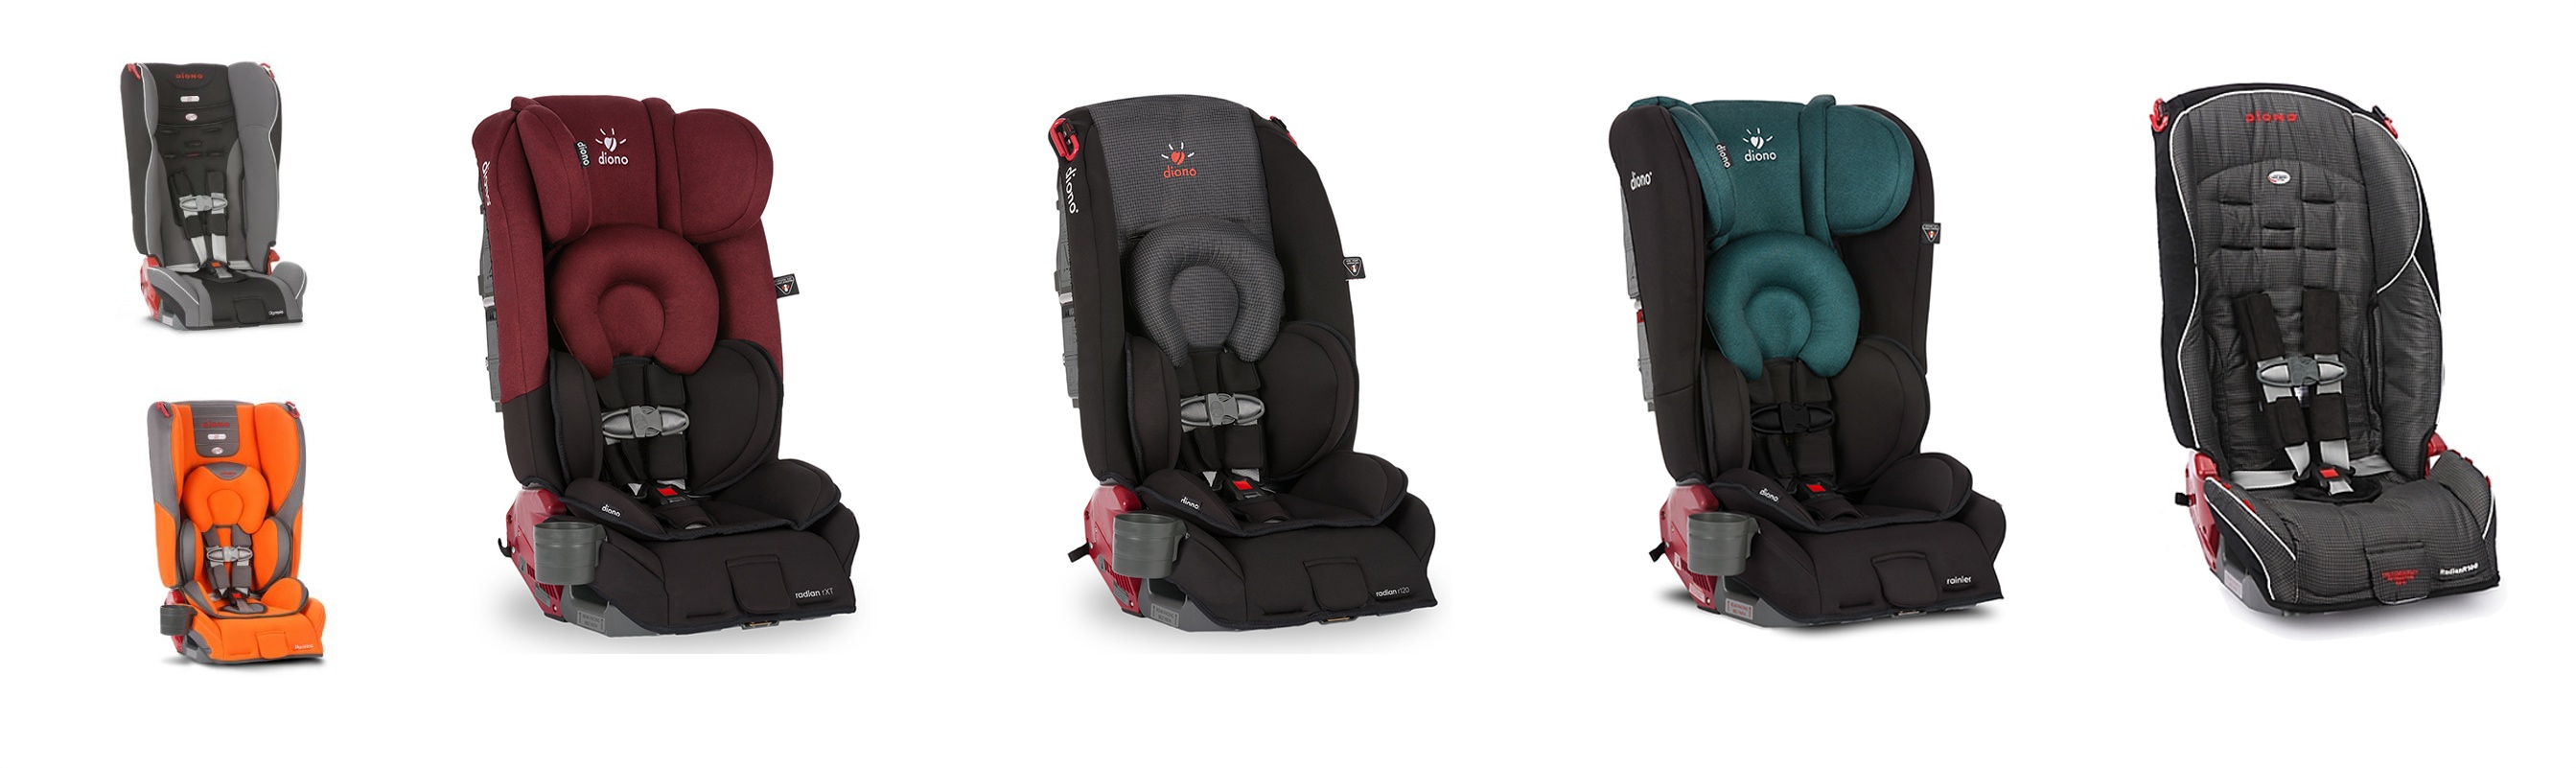 Diono Recalls Nearly 520,000 Child Car Seats Over Concerns About Restraint Strength